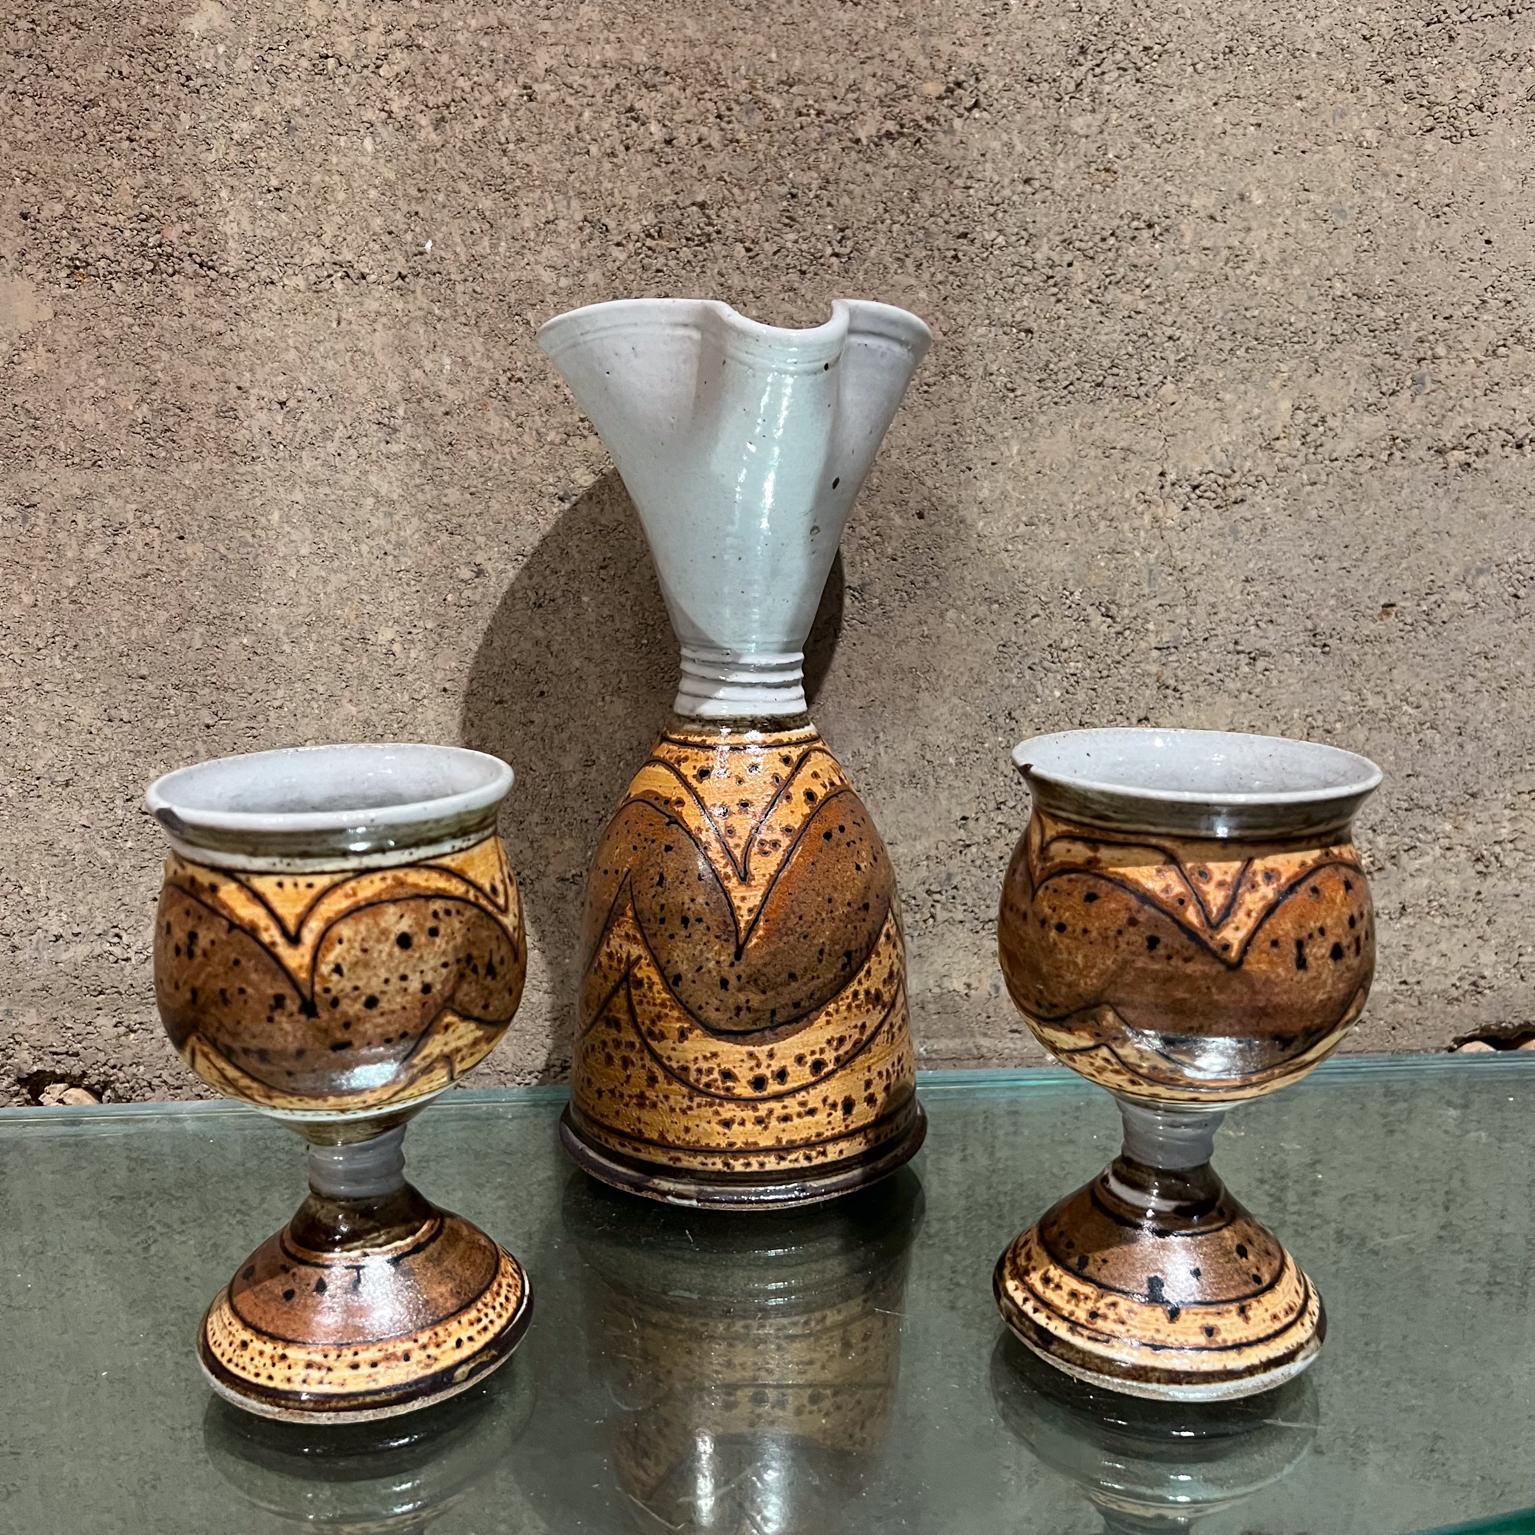 AMBIANIC presents
Studio Art Pottery Set Wine Carafe and Goblets
Stoneware Pitcher Carafe 9.5 h x 4.38 diameter Two drinking cups 5.5 x 3.18 diameter
Pitcher has a signature, unable to read.
Preowned original vintage condition
See all images.